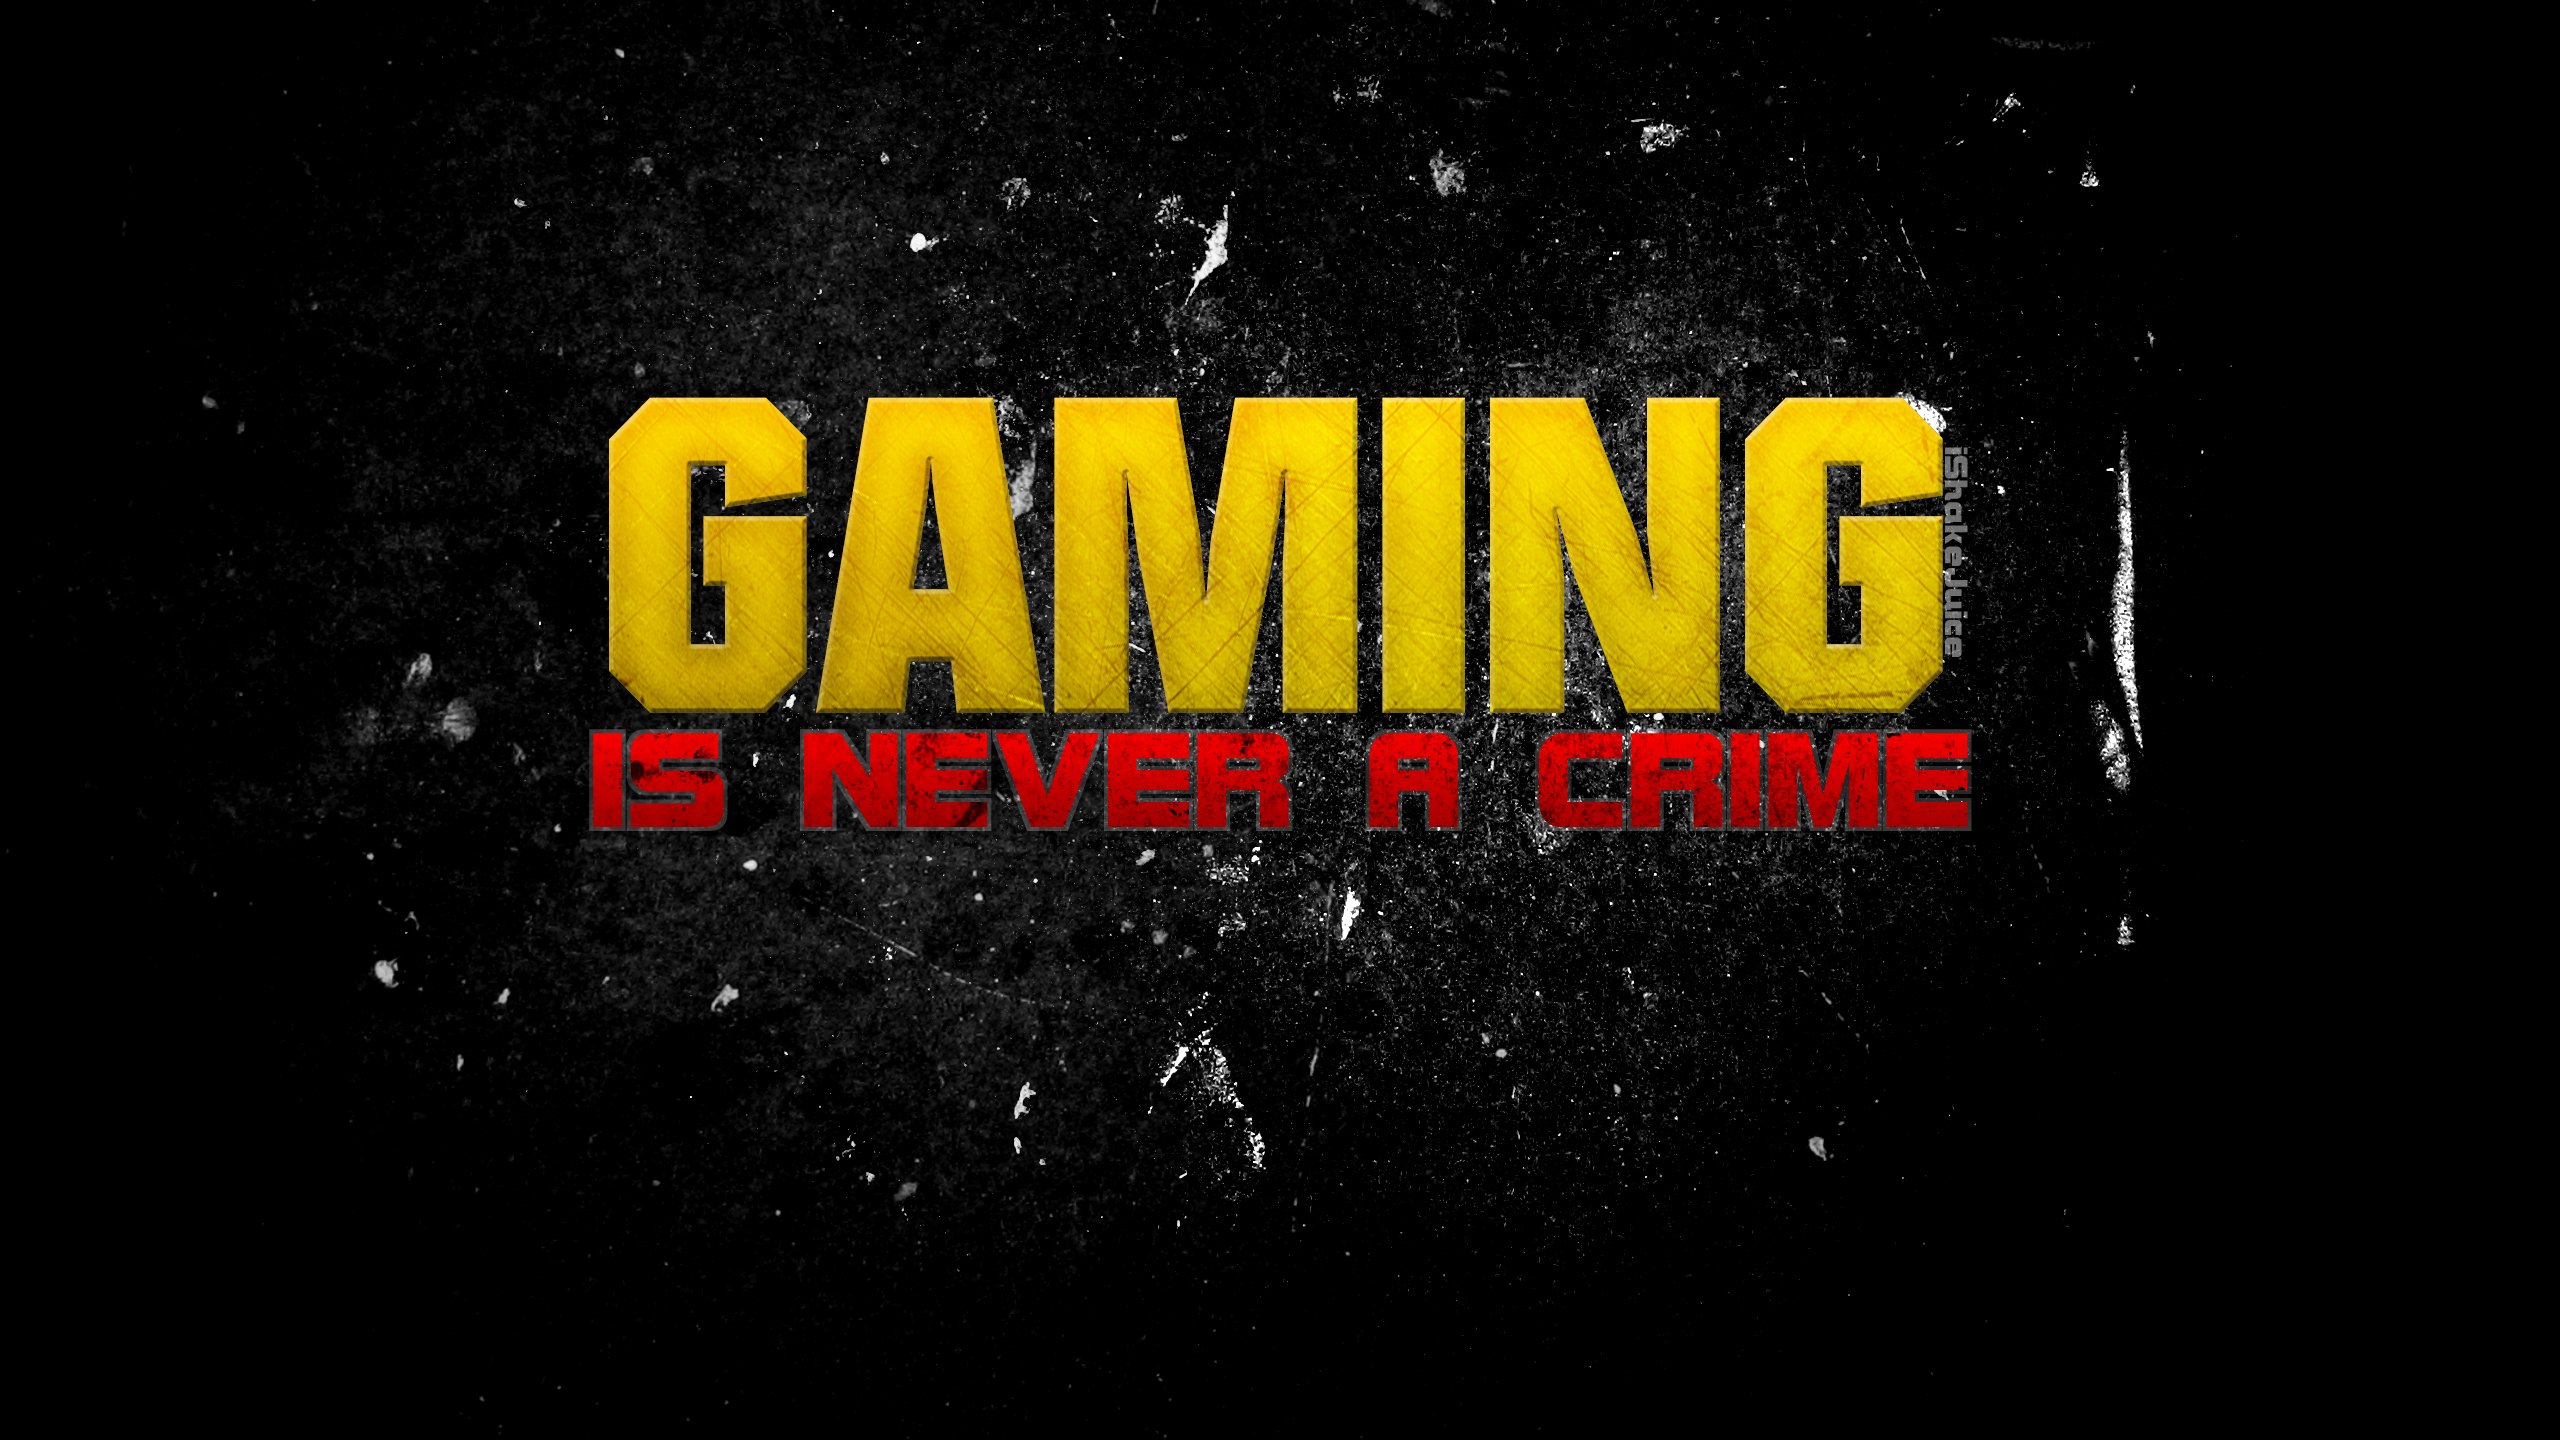 Gaming Is Not A Crime Wallpapers Wallpaper Cave